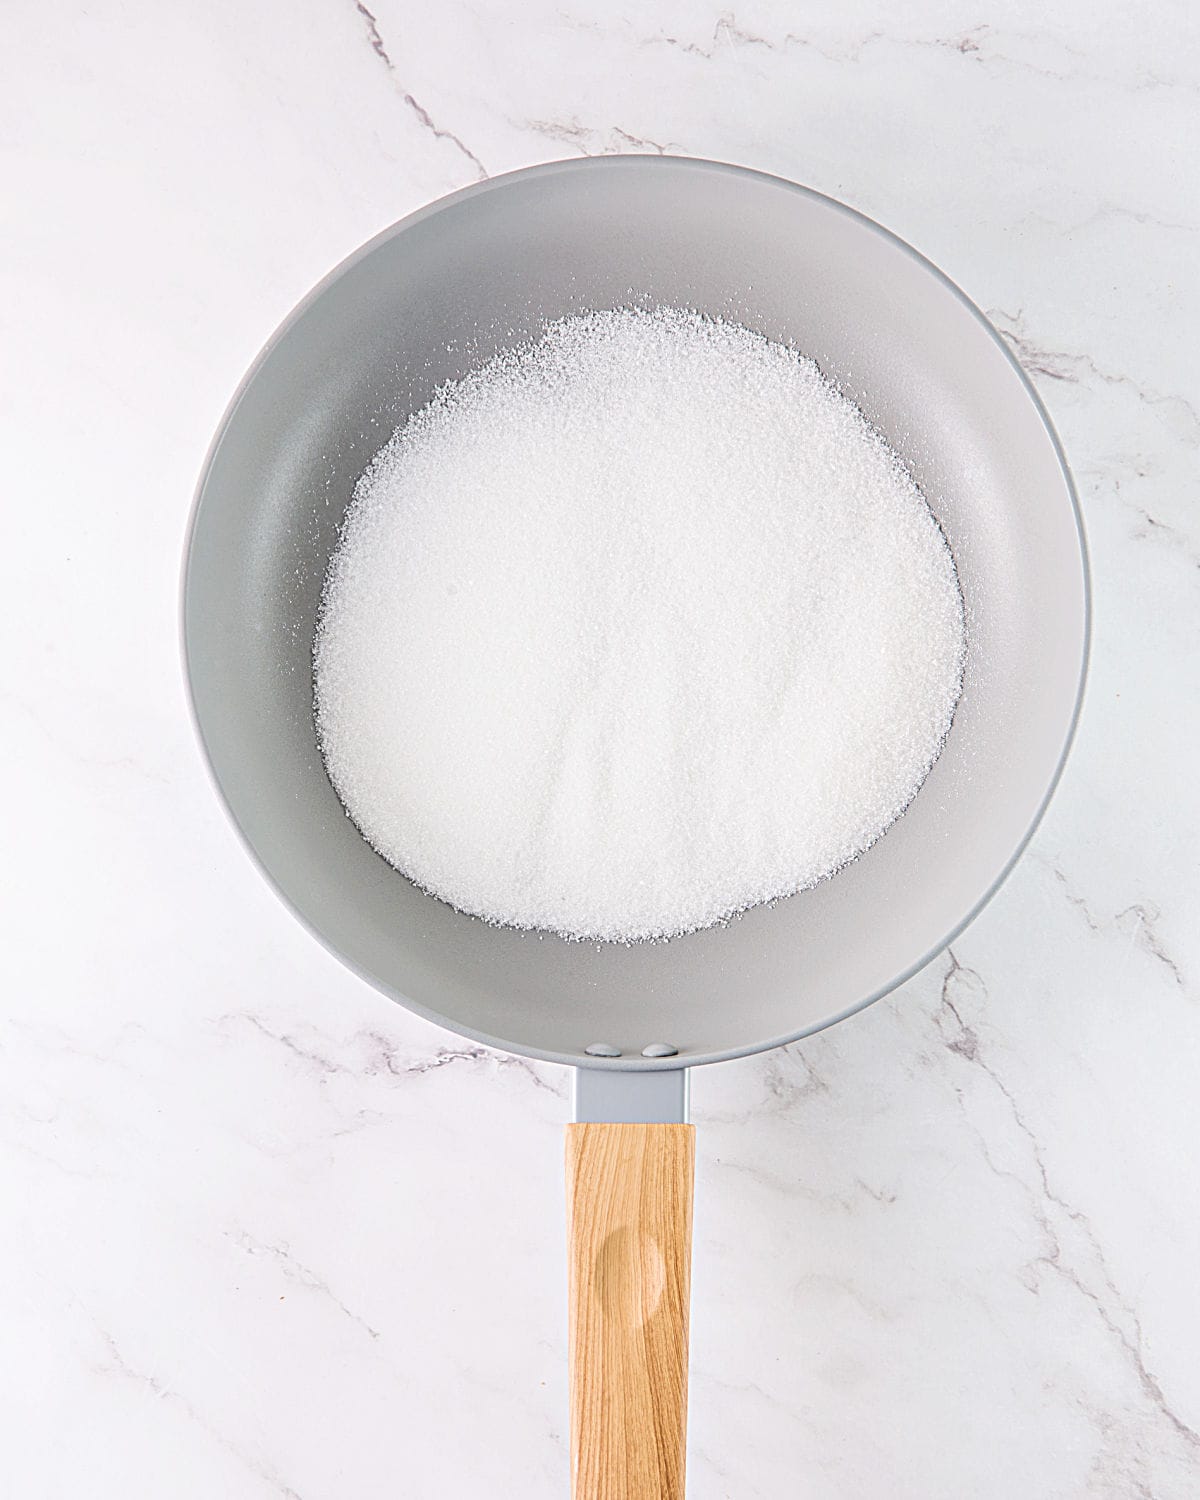 Granulated sugar in a light gray skillet on white marble.